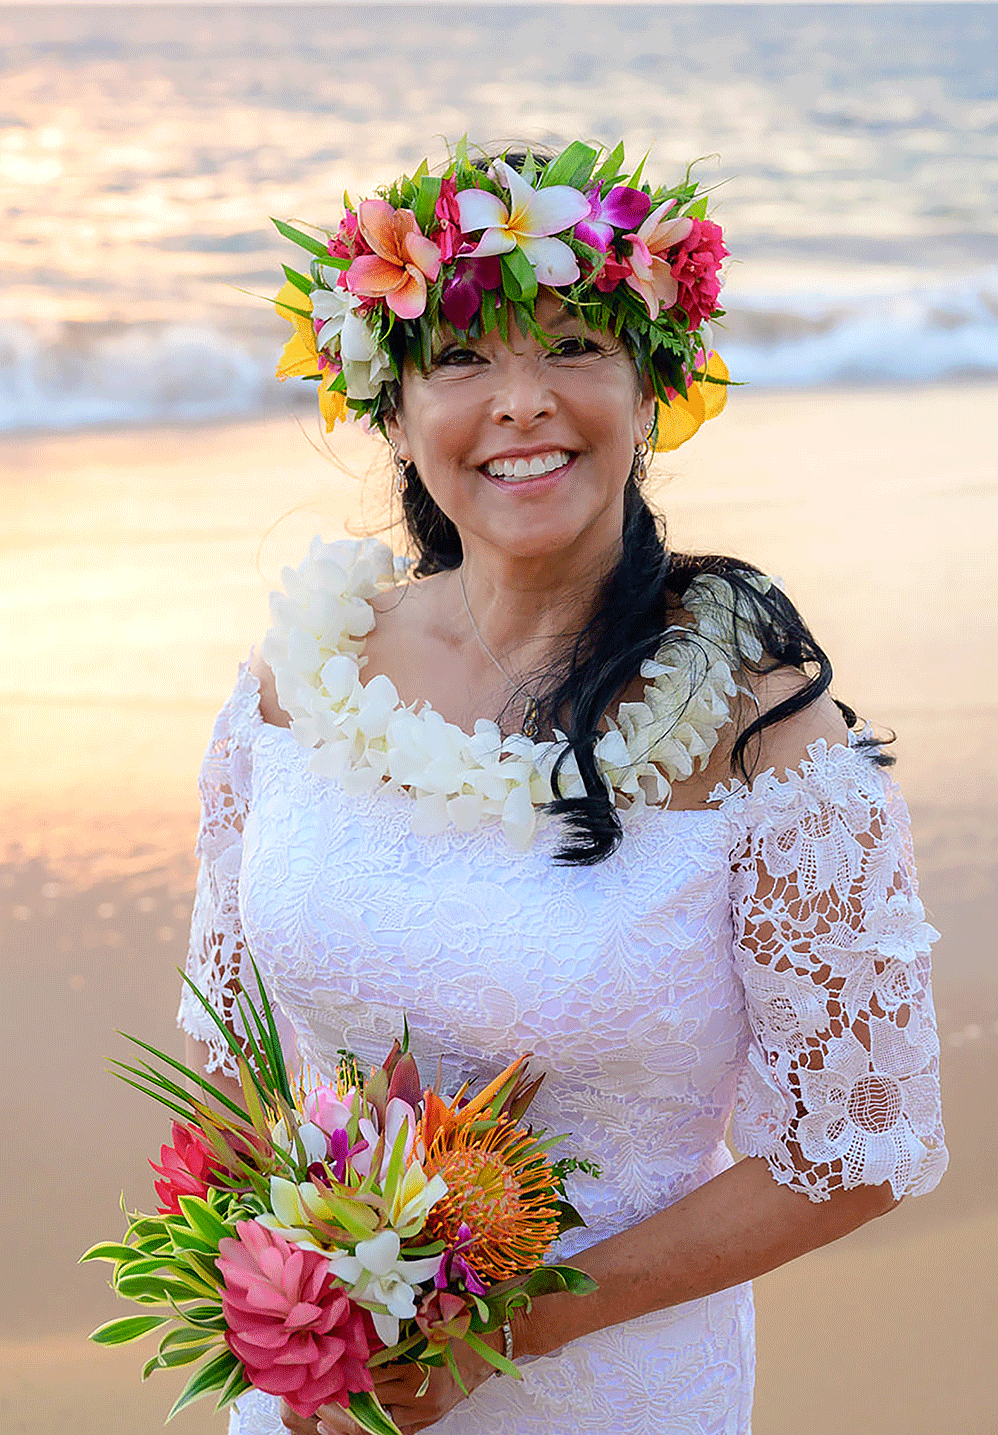 Maui Wedding from the Heart